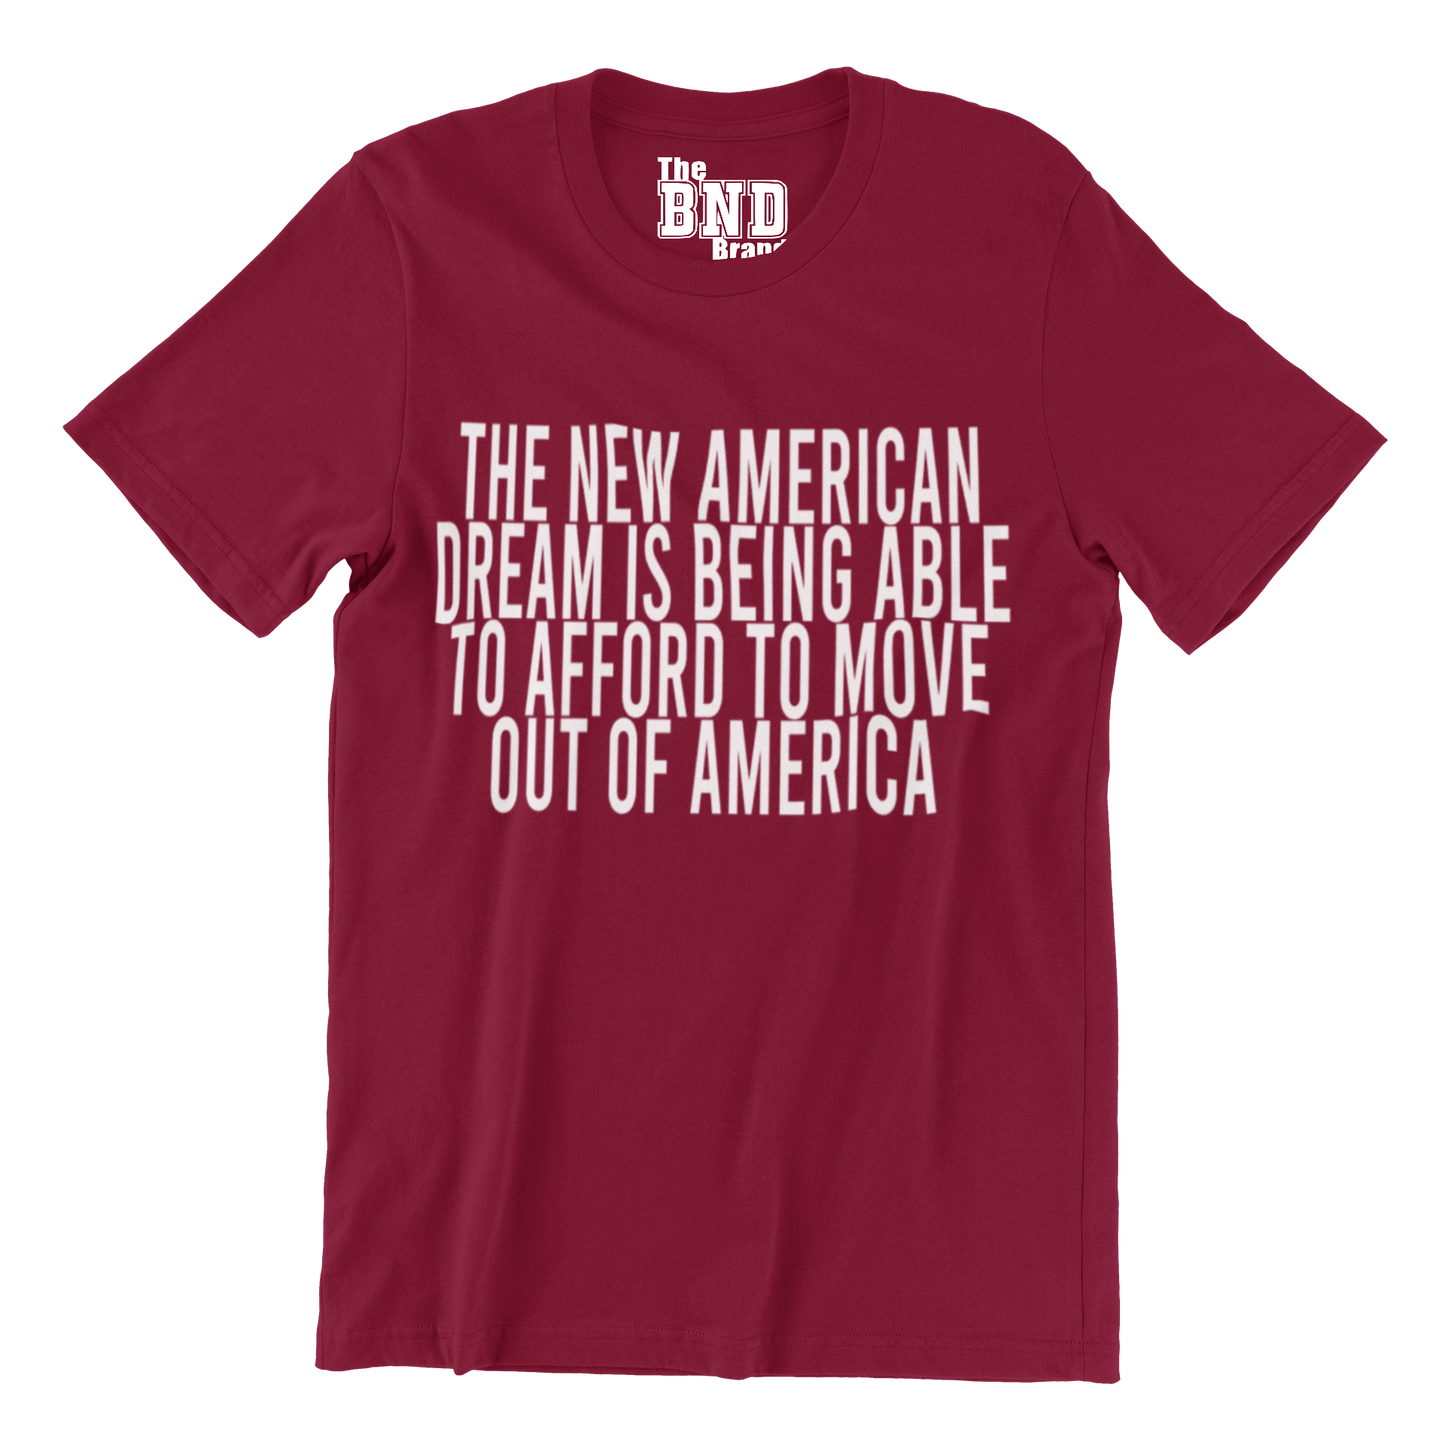 THE NEW AMERICAN DREAM IS BEING ALE TO AFFORD TO MOVE TF OUT OF AMERICA TEE